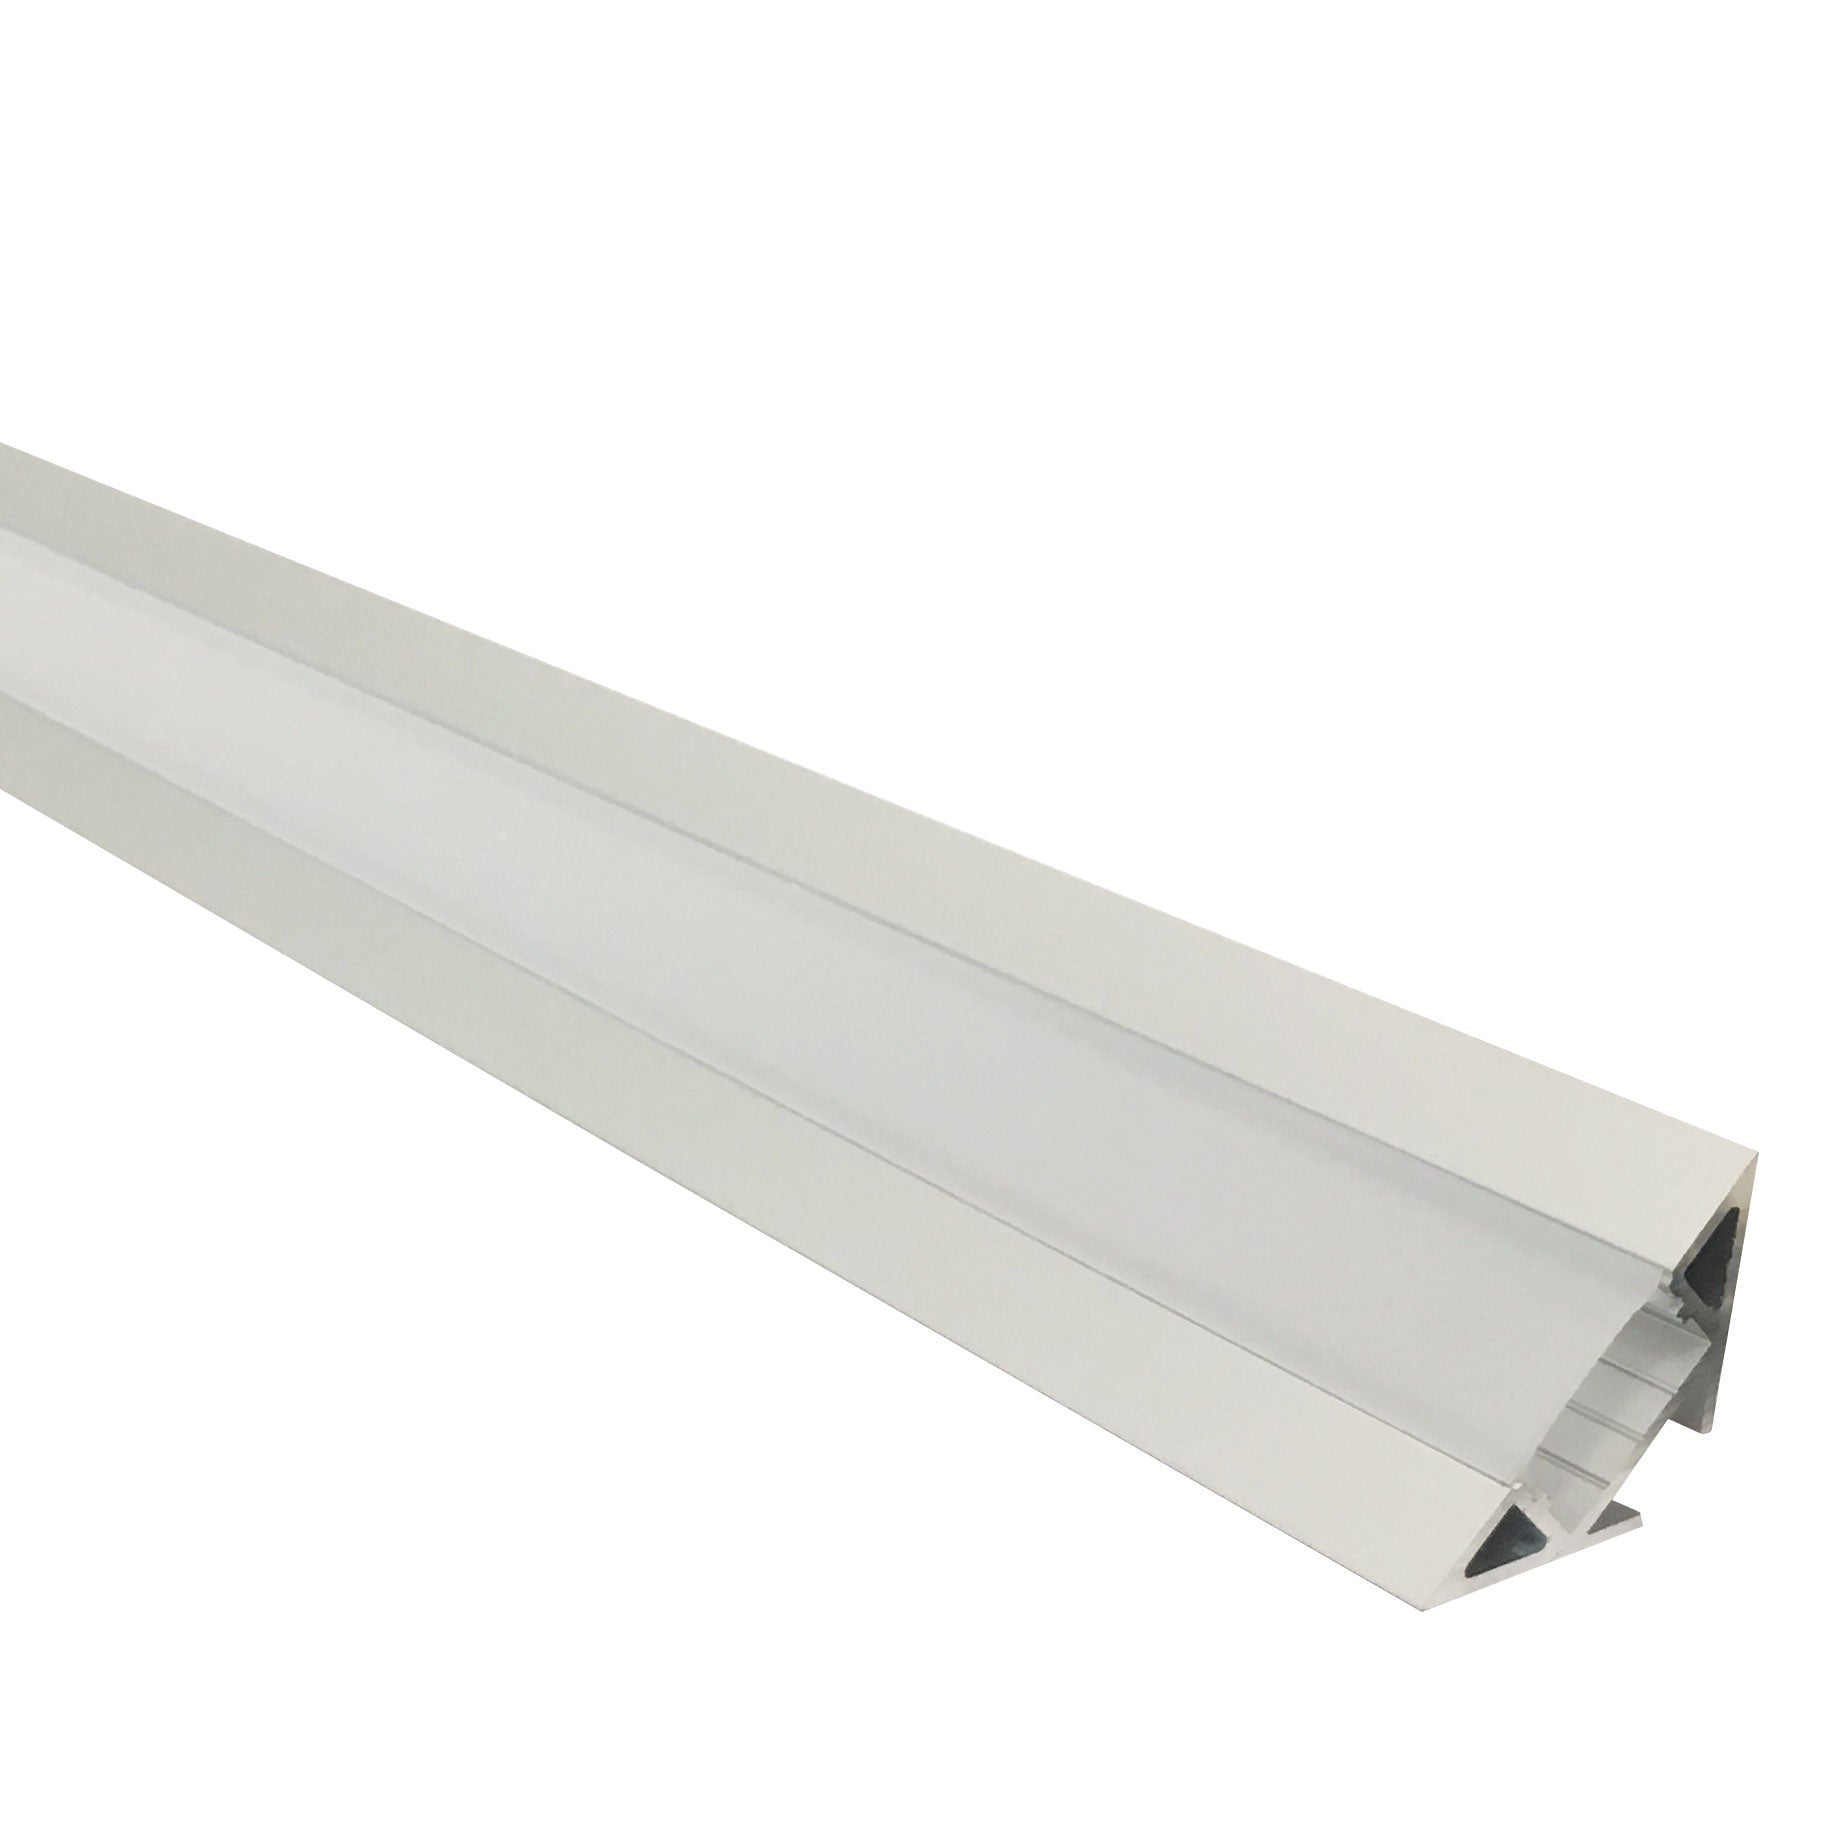 Nora Lighting NATL-C28A 4-ft Corner Channel(Plastic Diffuser and End Caps Included) - Aluminum